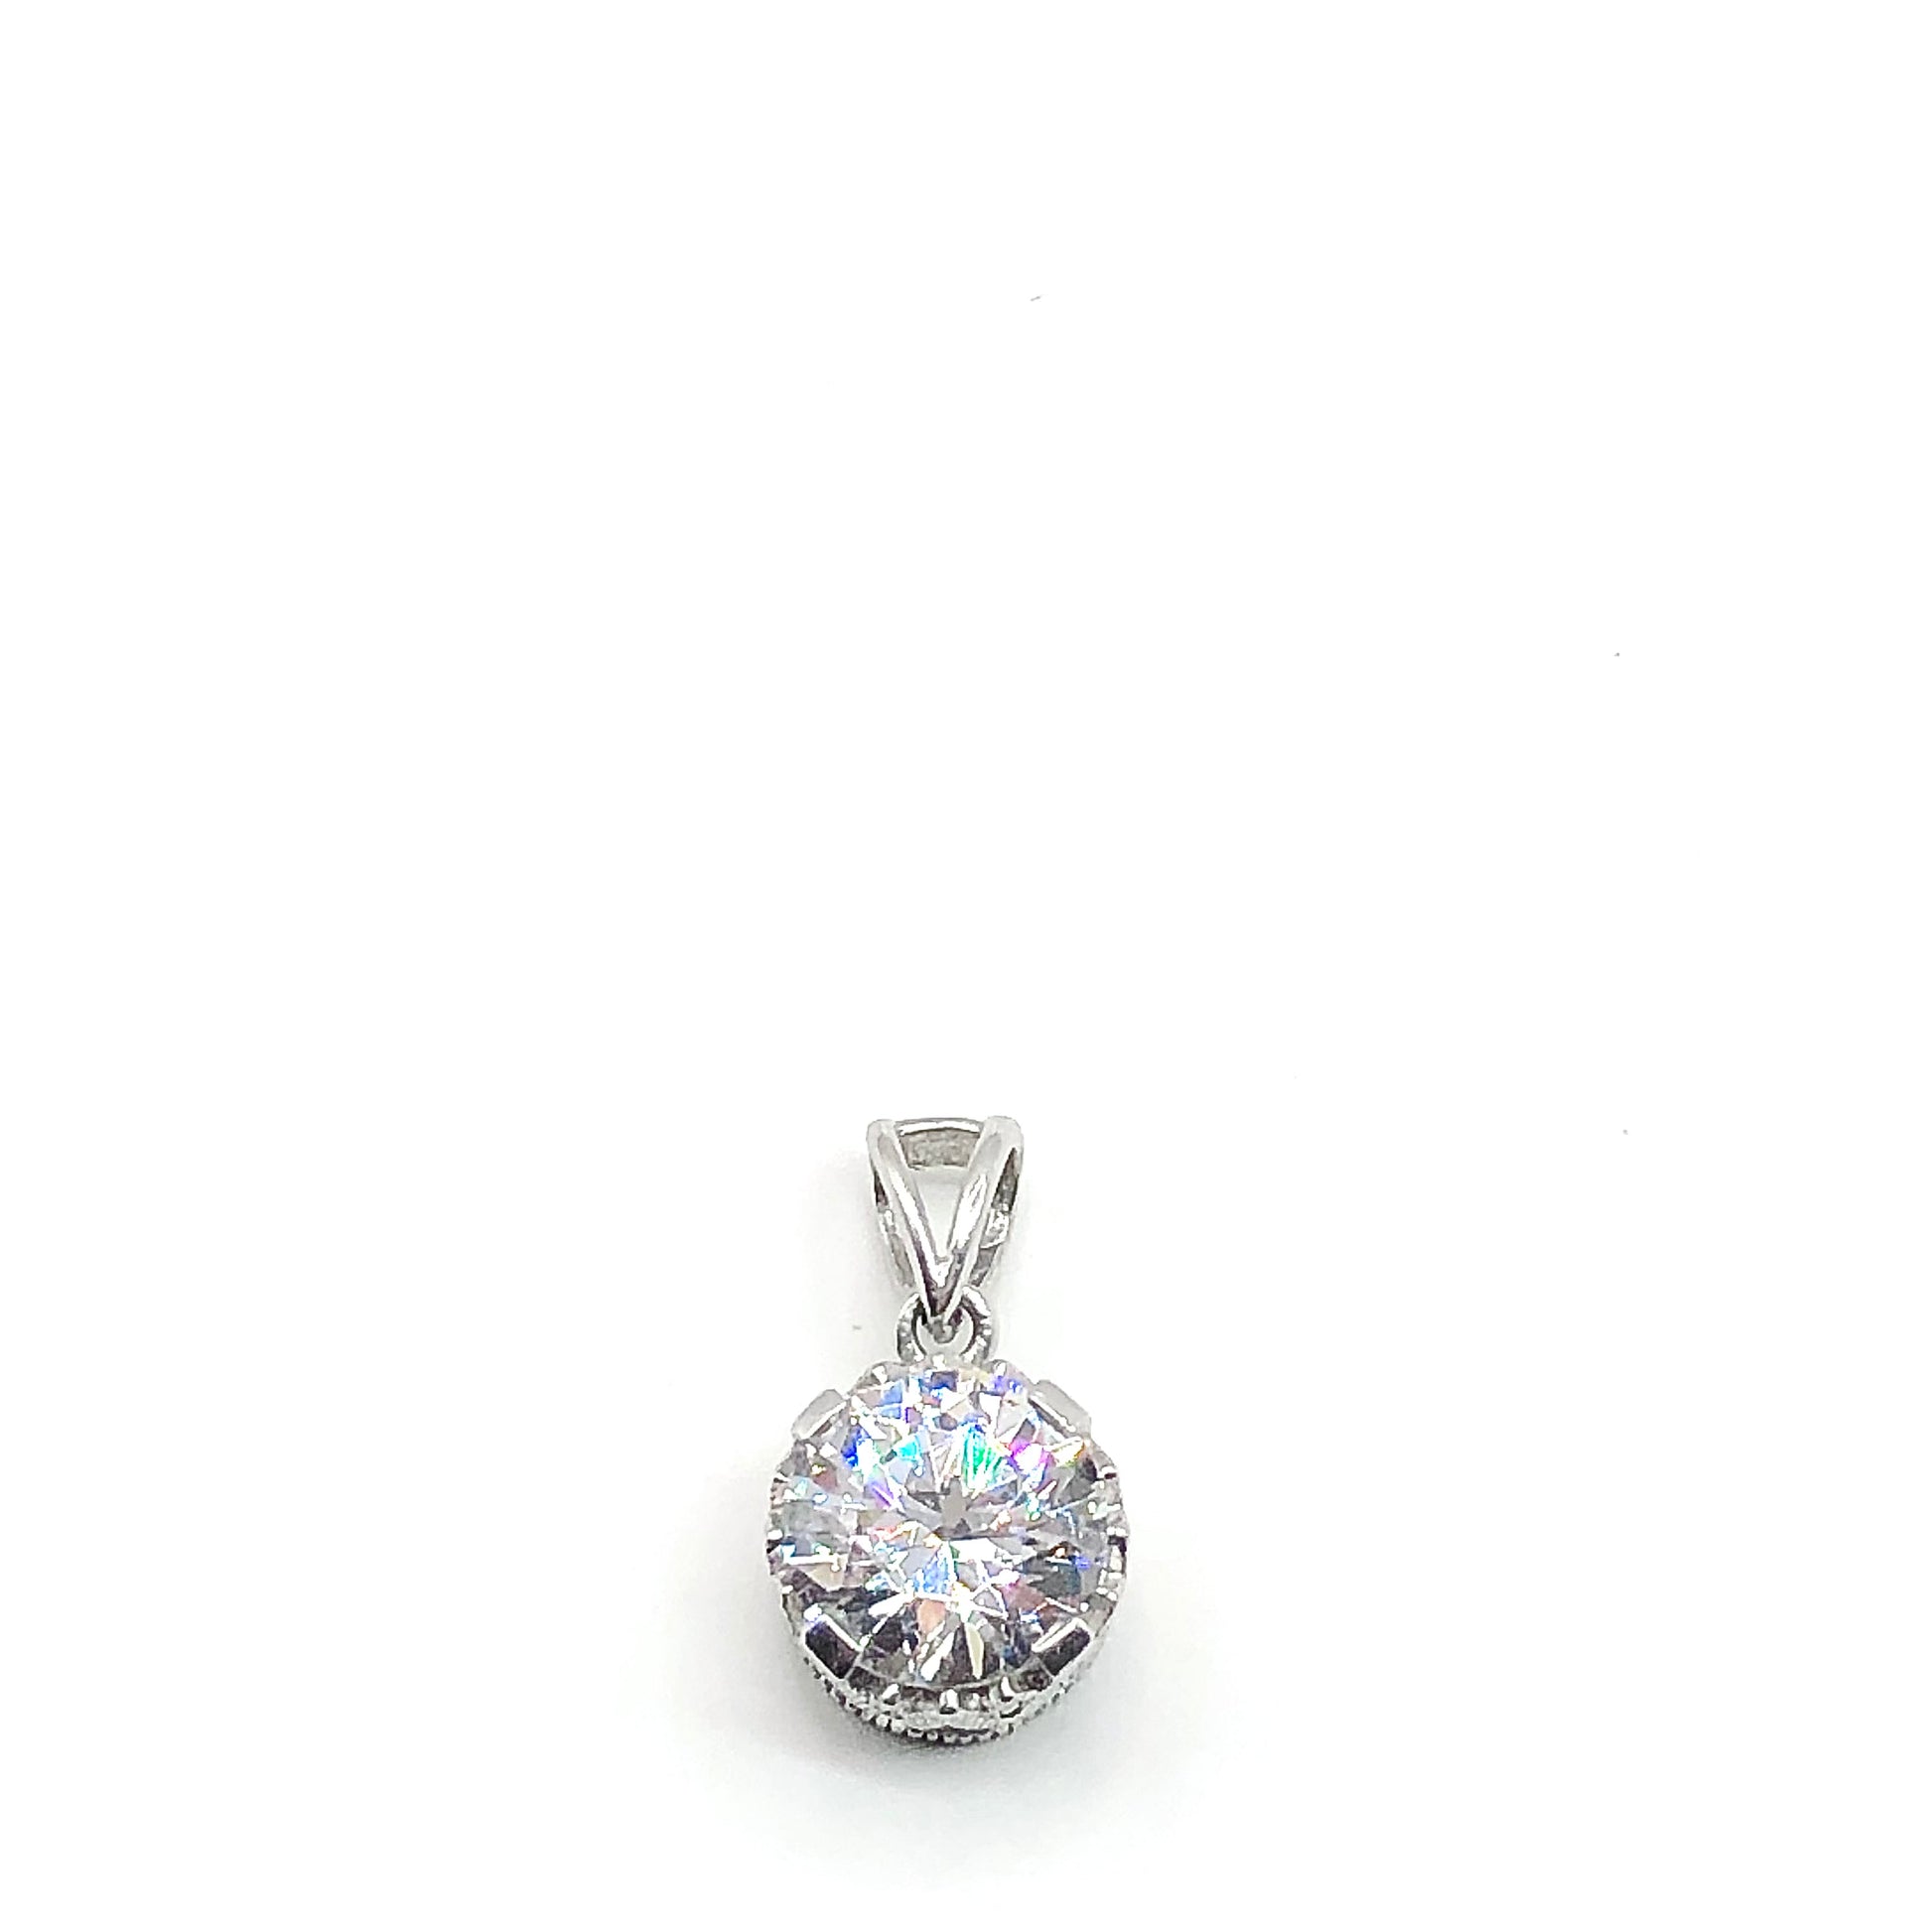 3.8ct White Cubic Zirconia Crown Style Sterling Silver Solitaire Pendant